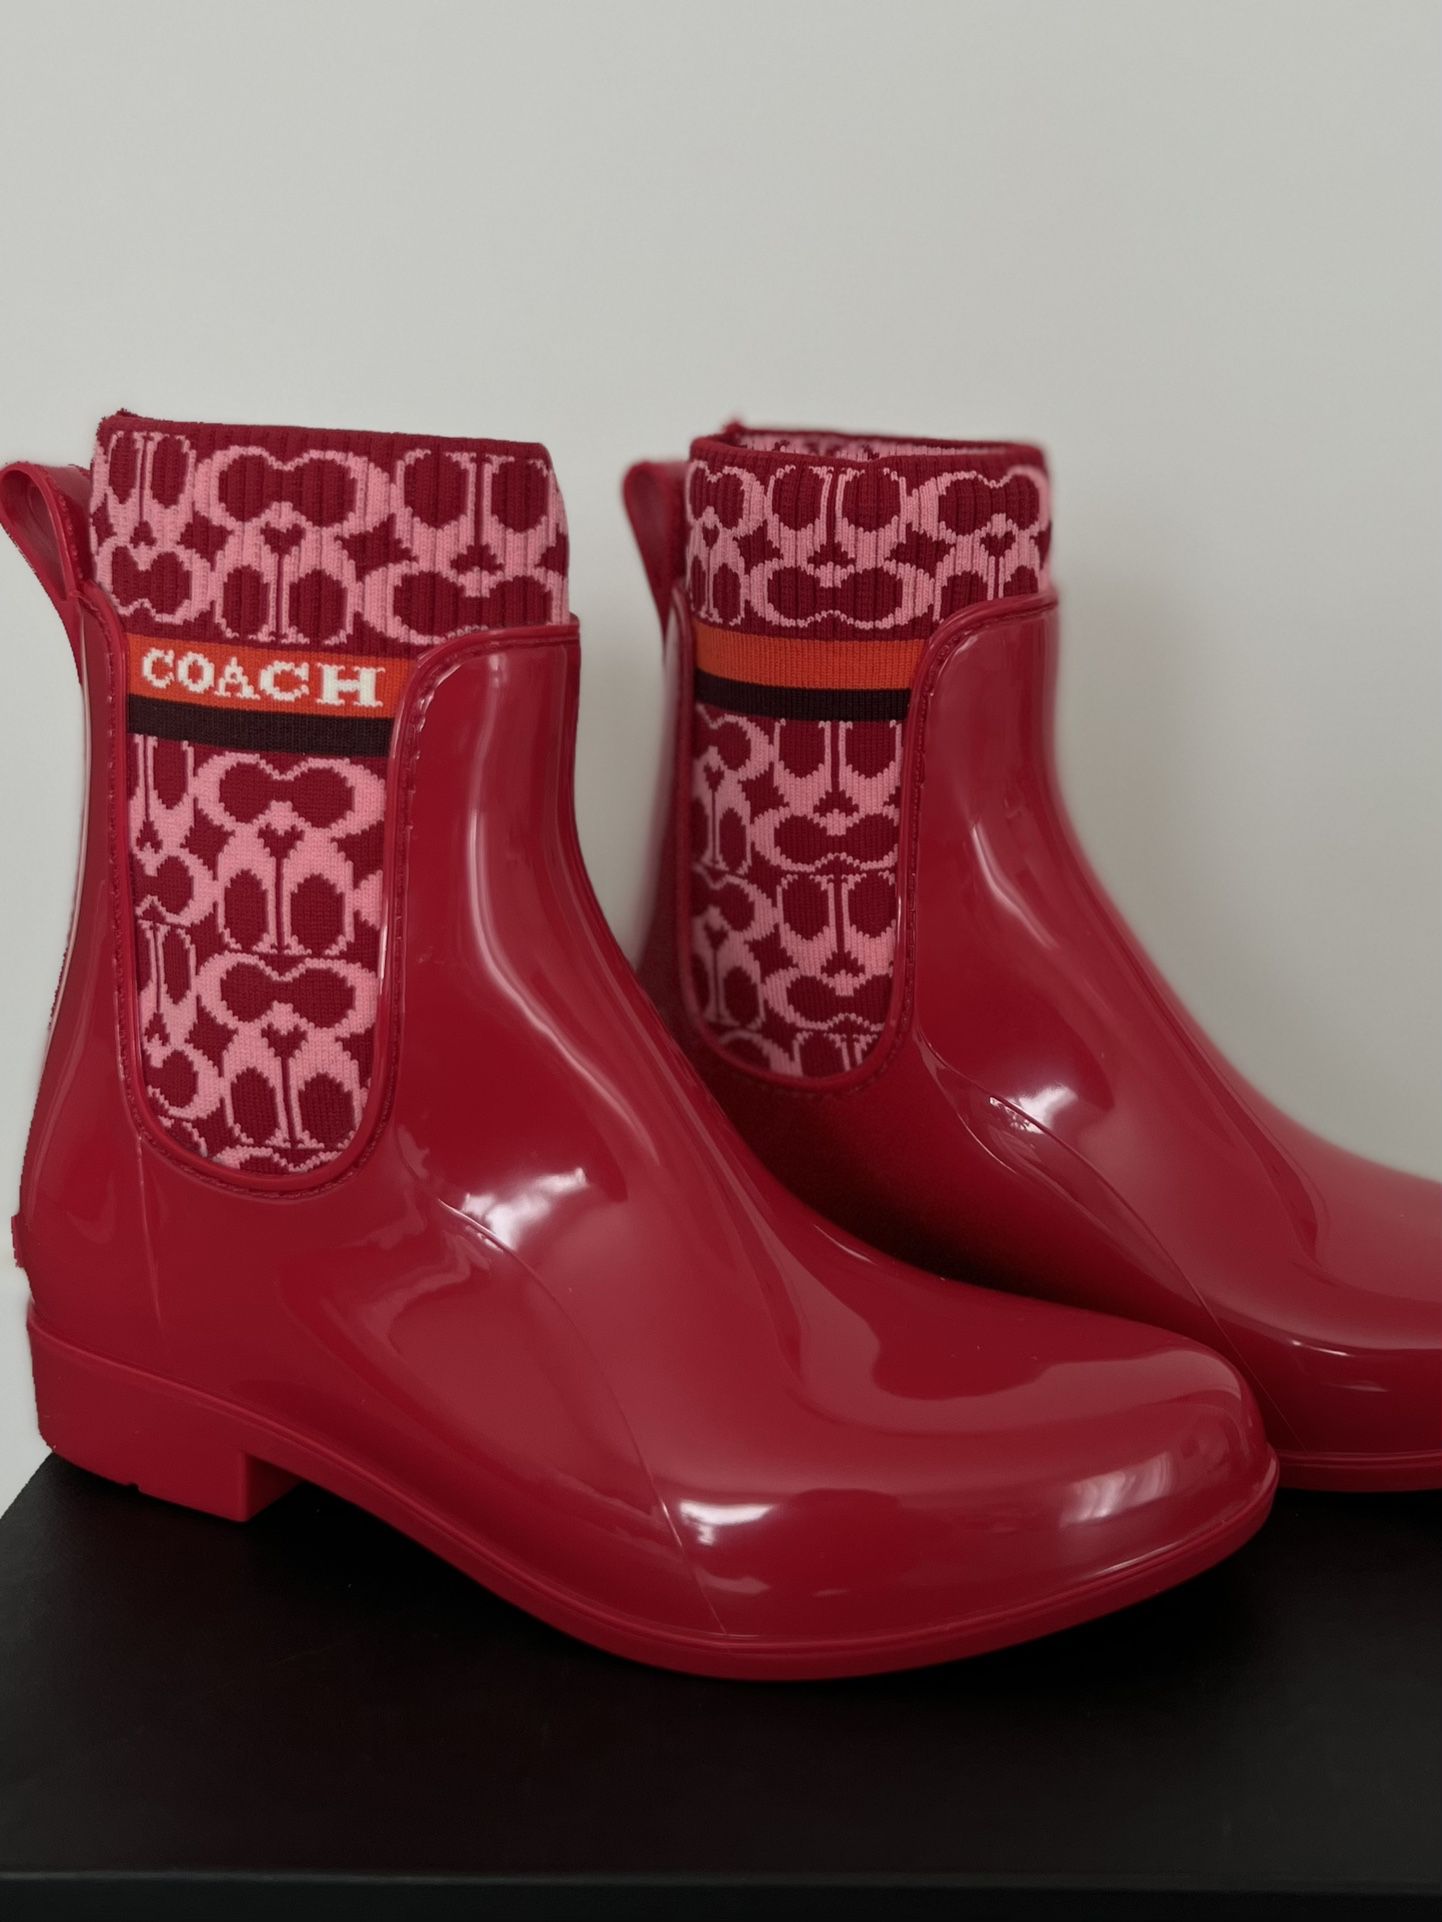 Authentic New! Receipt From Saks Fith Ave COACH Rivington Rain Boots 6 Candy Apple